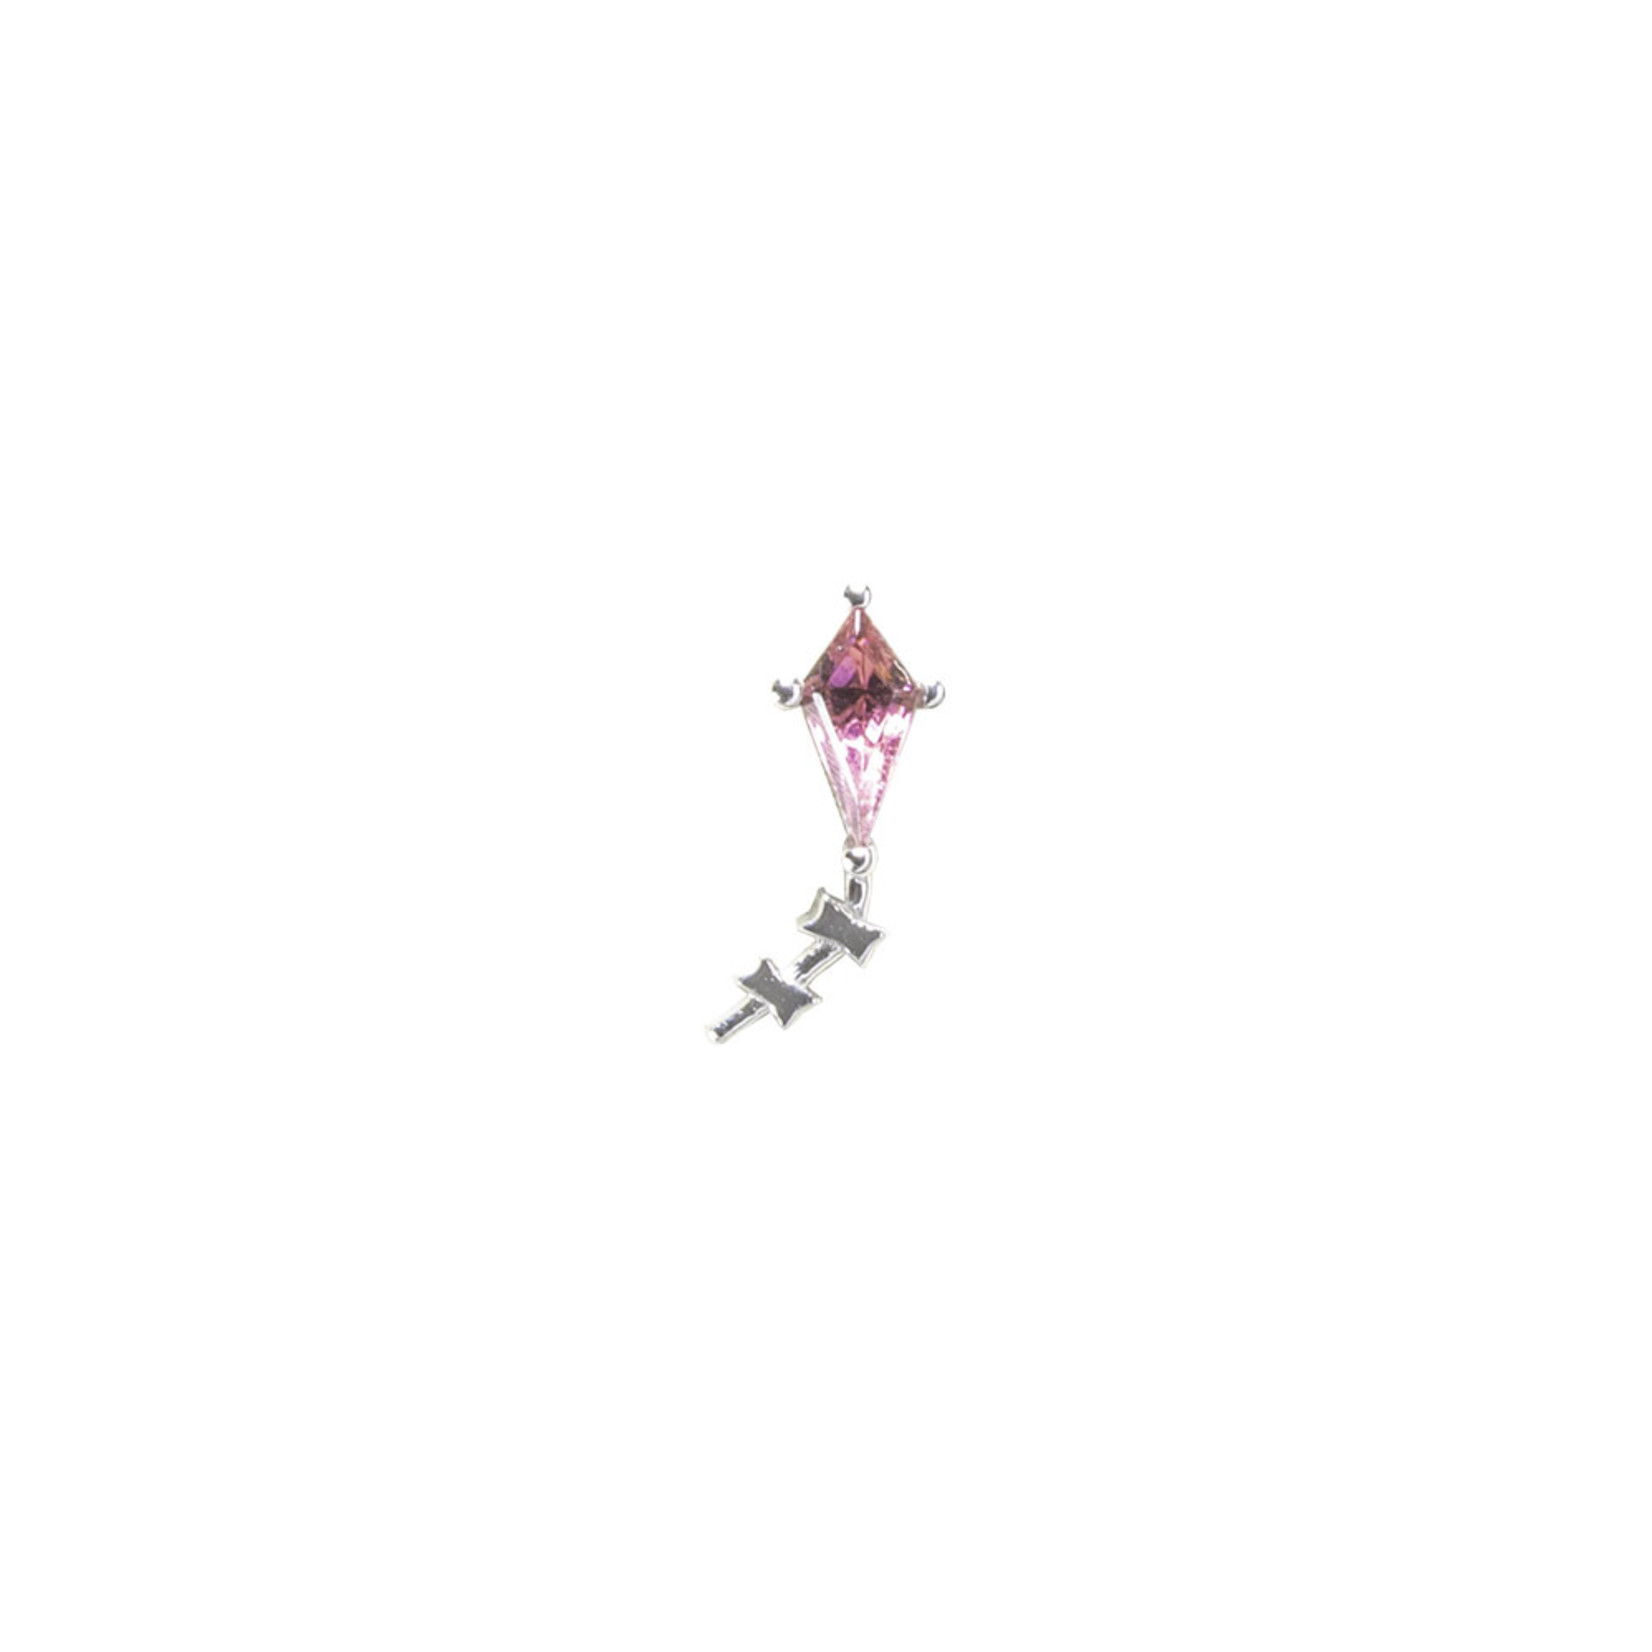 BVLA BVLA white gold "Hang On!" threaded end with 4x2 Pink Tourmaline kite